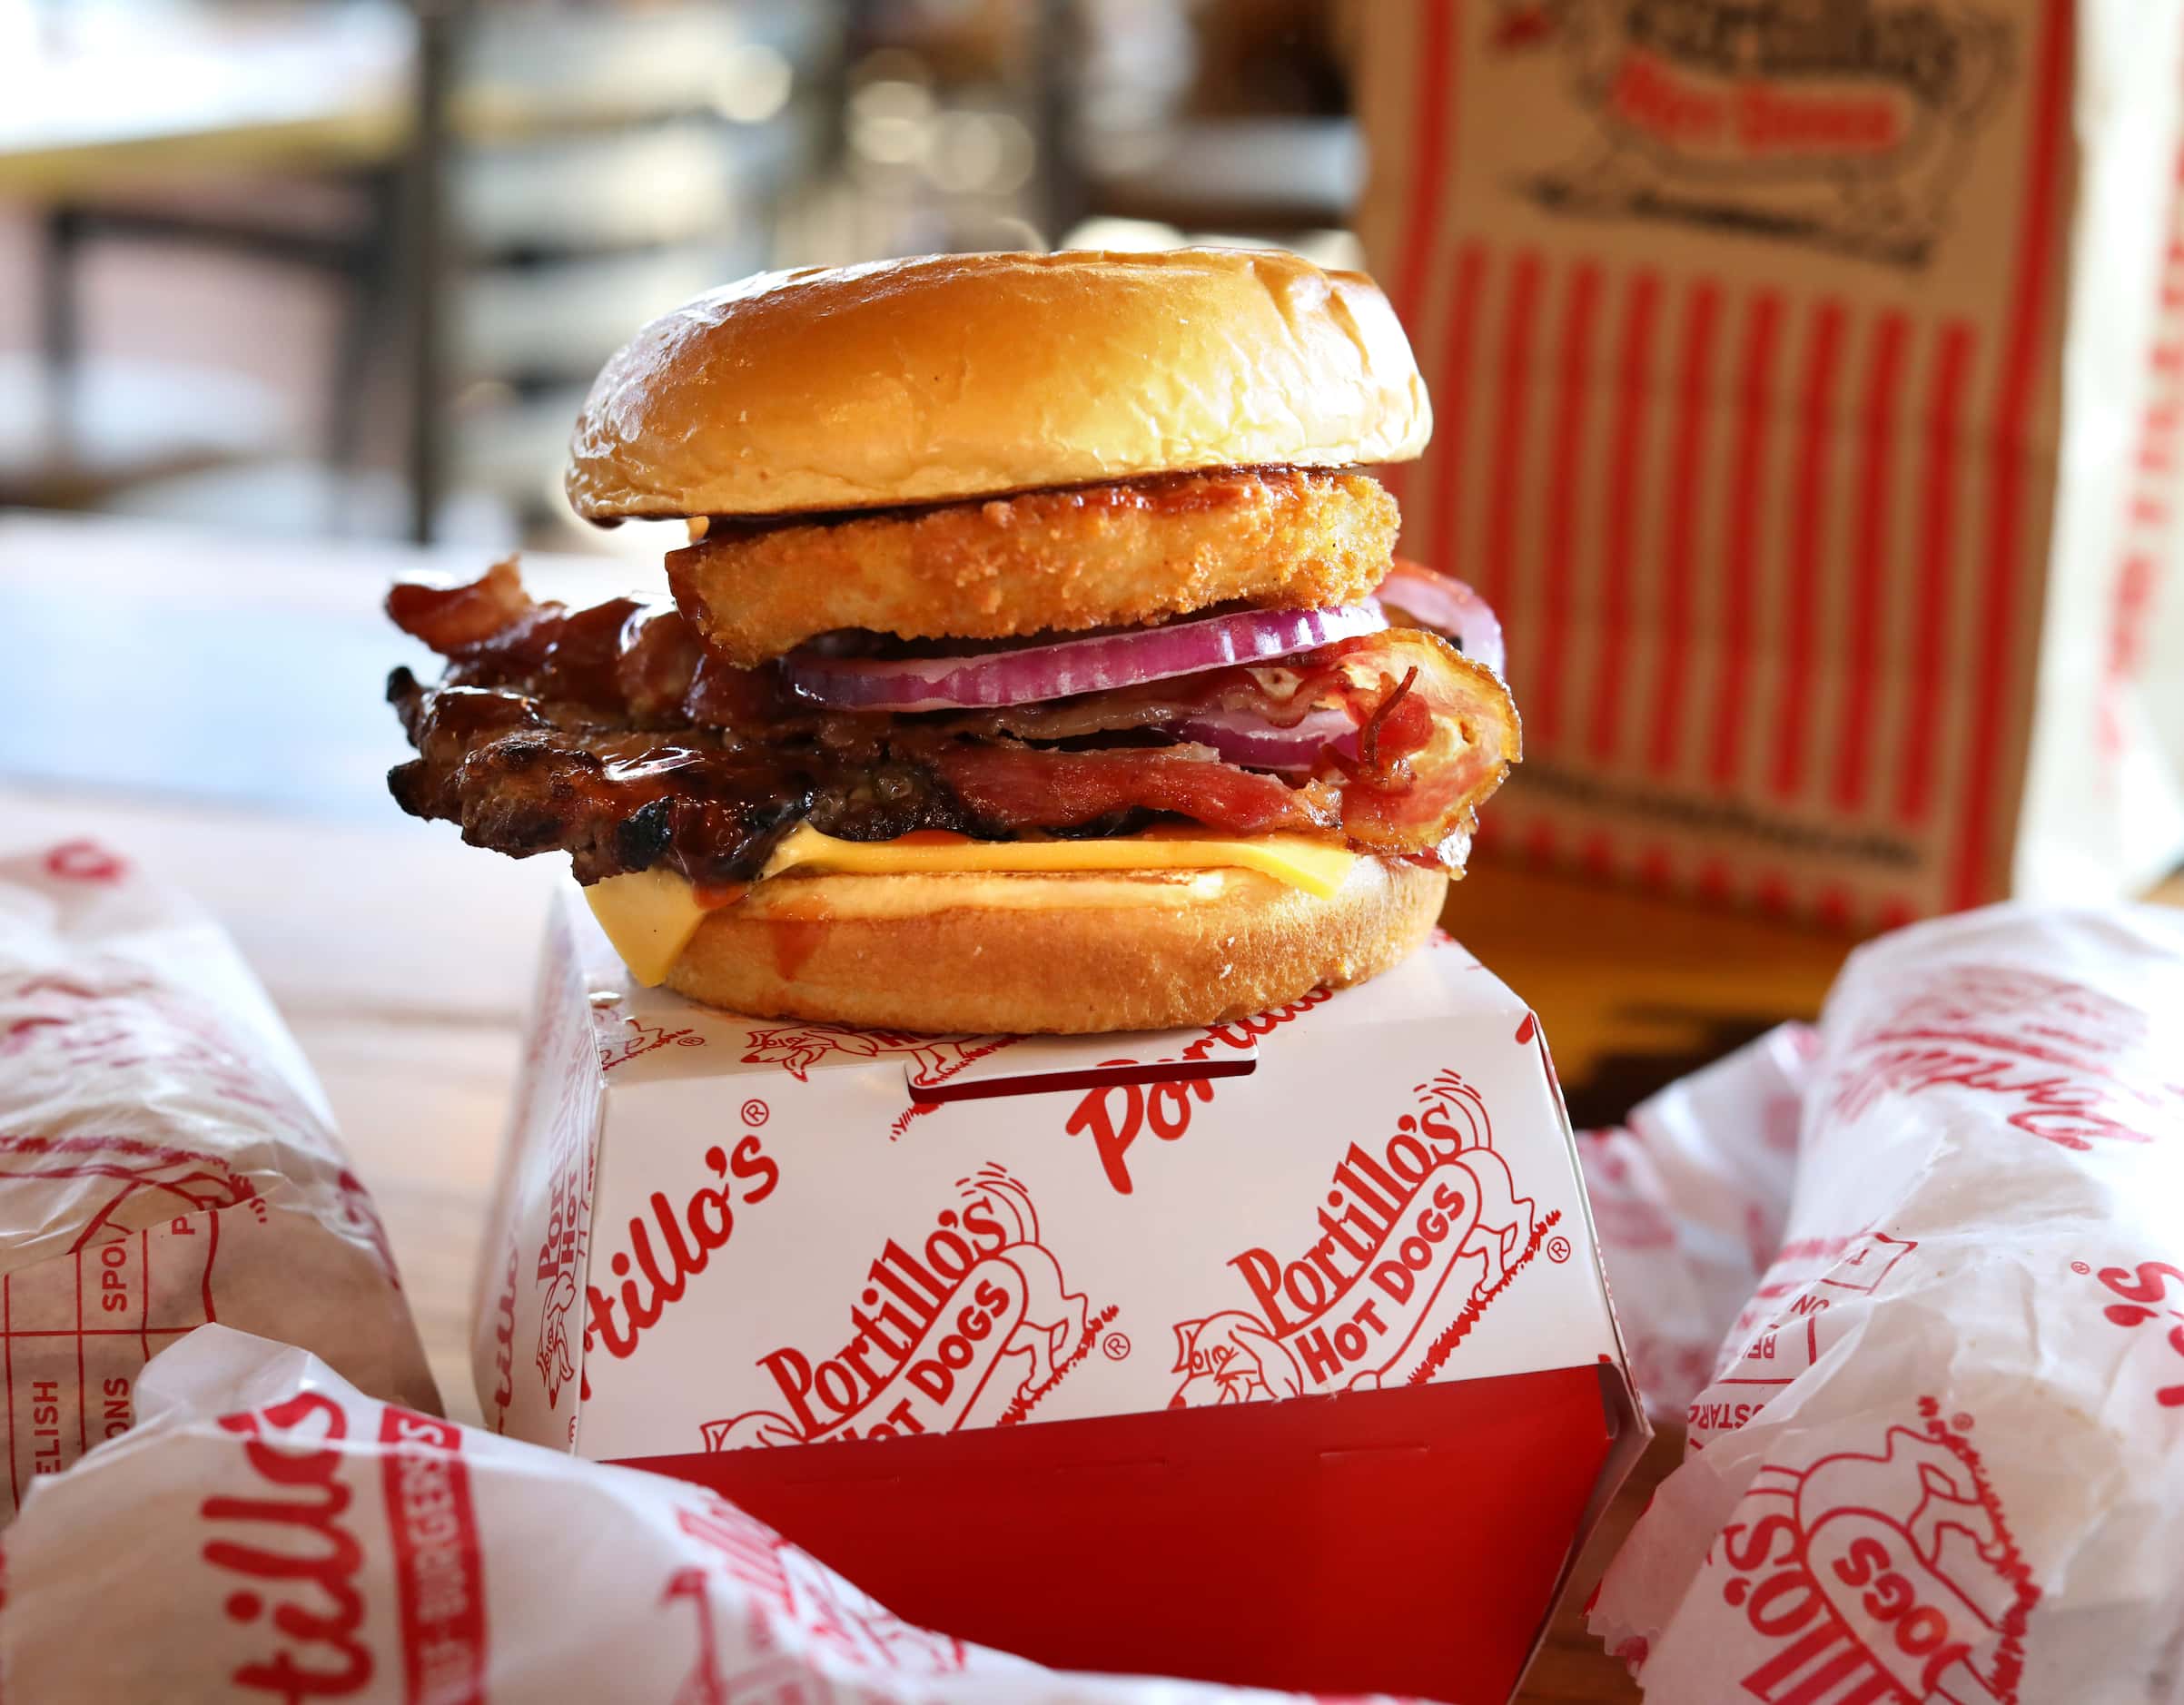 The Rodeo Burger is one of the menu items at Portillo's in Allen.